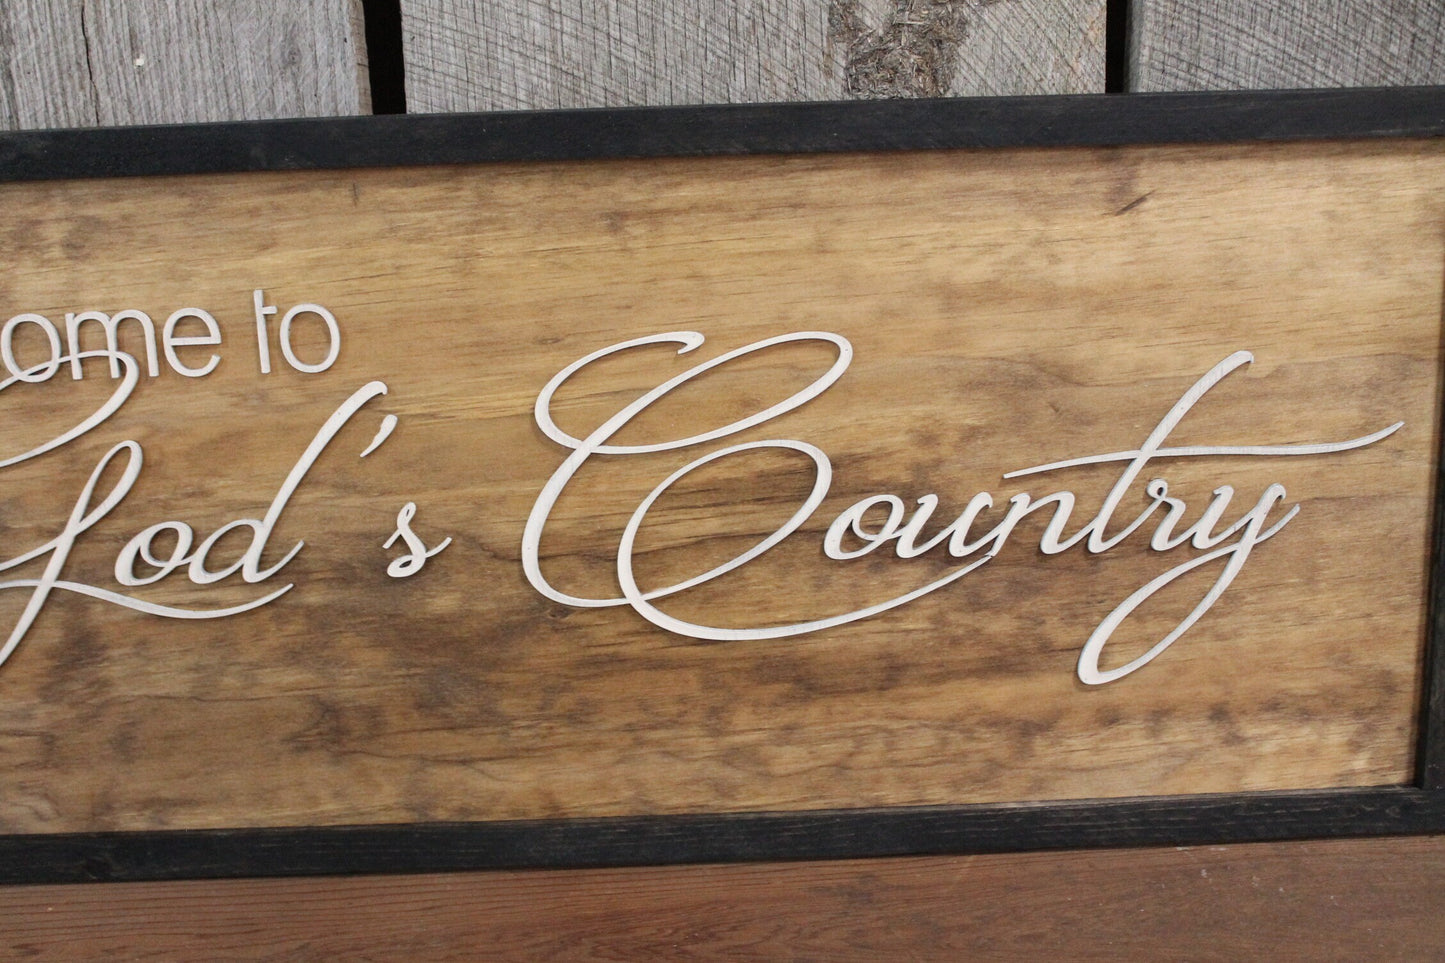 God's Country Entrance Sign Welcome Sign 3D Raised Entrance Sign Text Large Framed Sign Rustic Primitive Barn Wood Country